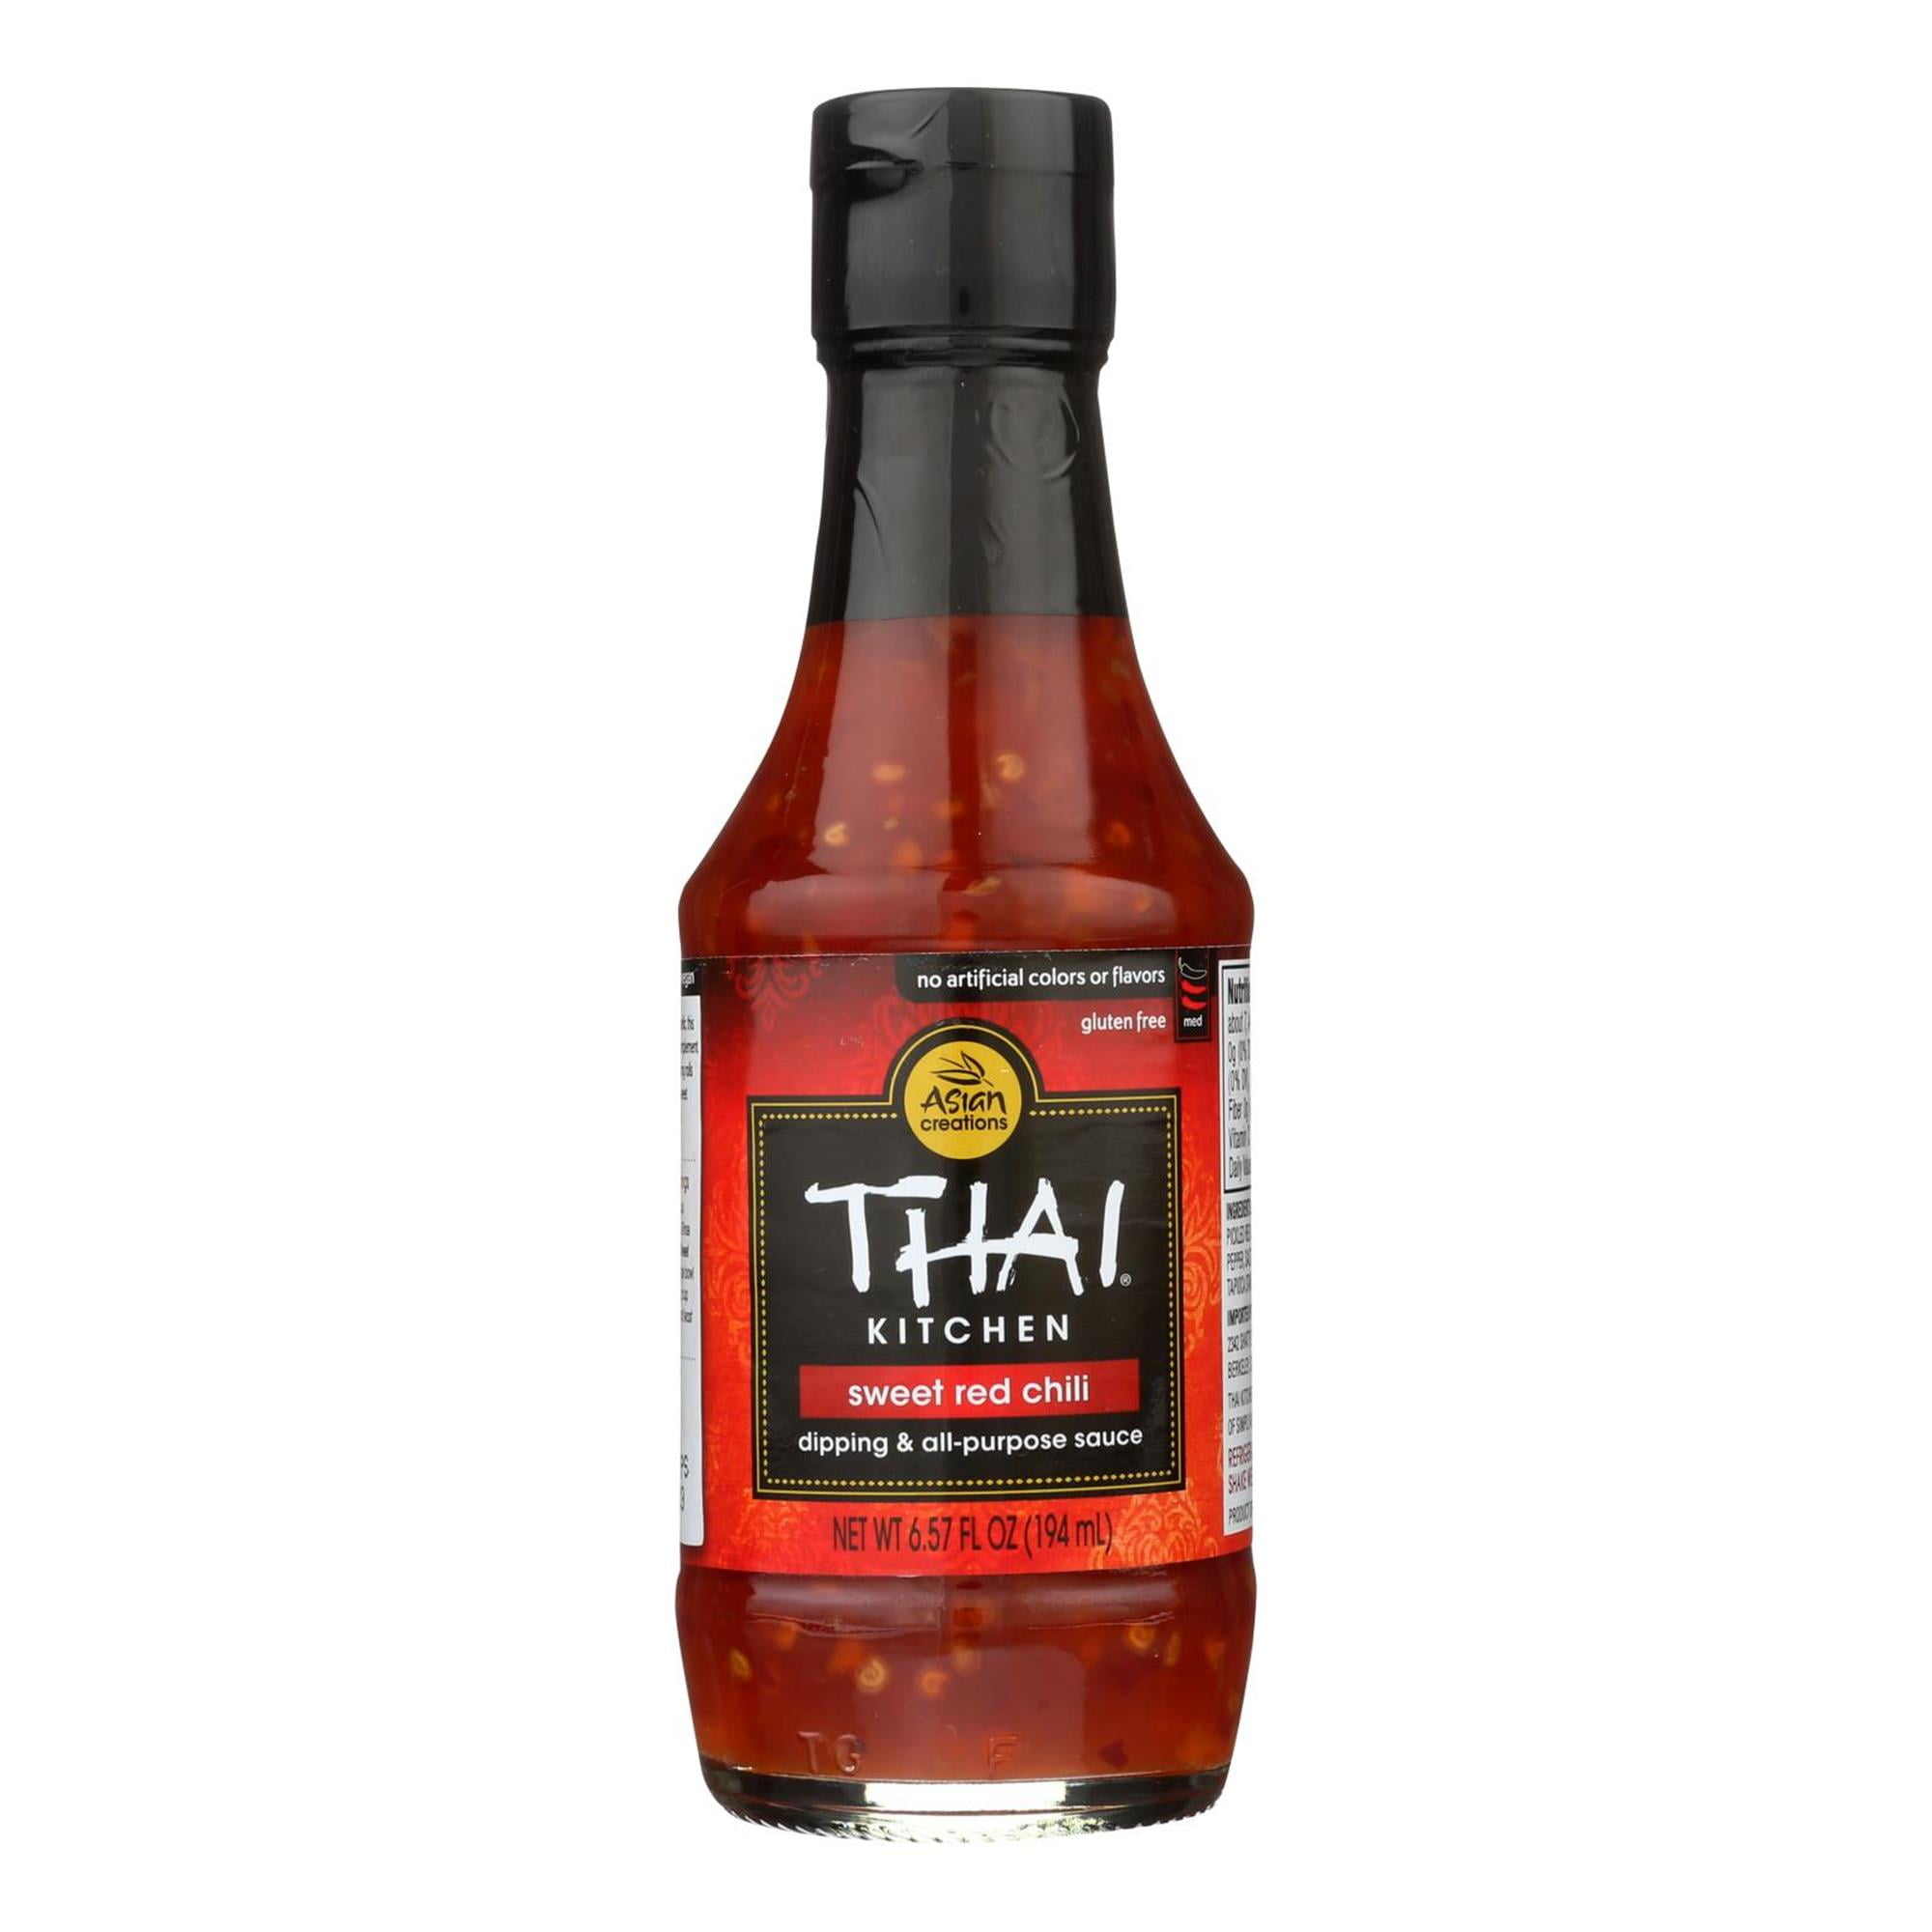 Thai Kitchen Sweet Red Chili Dipping & All-Purpose Sauce, 6.57 Fz, Wal...